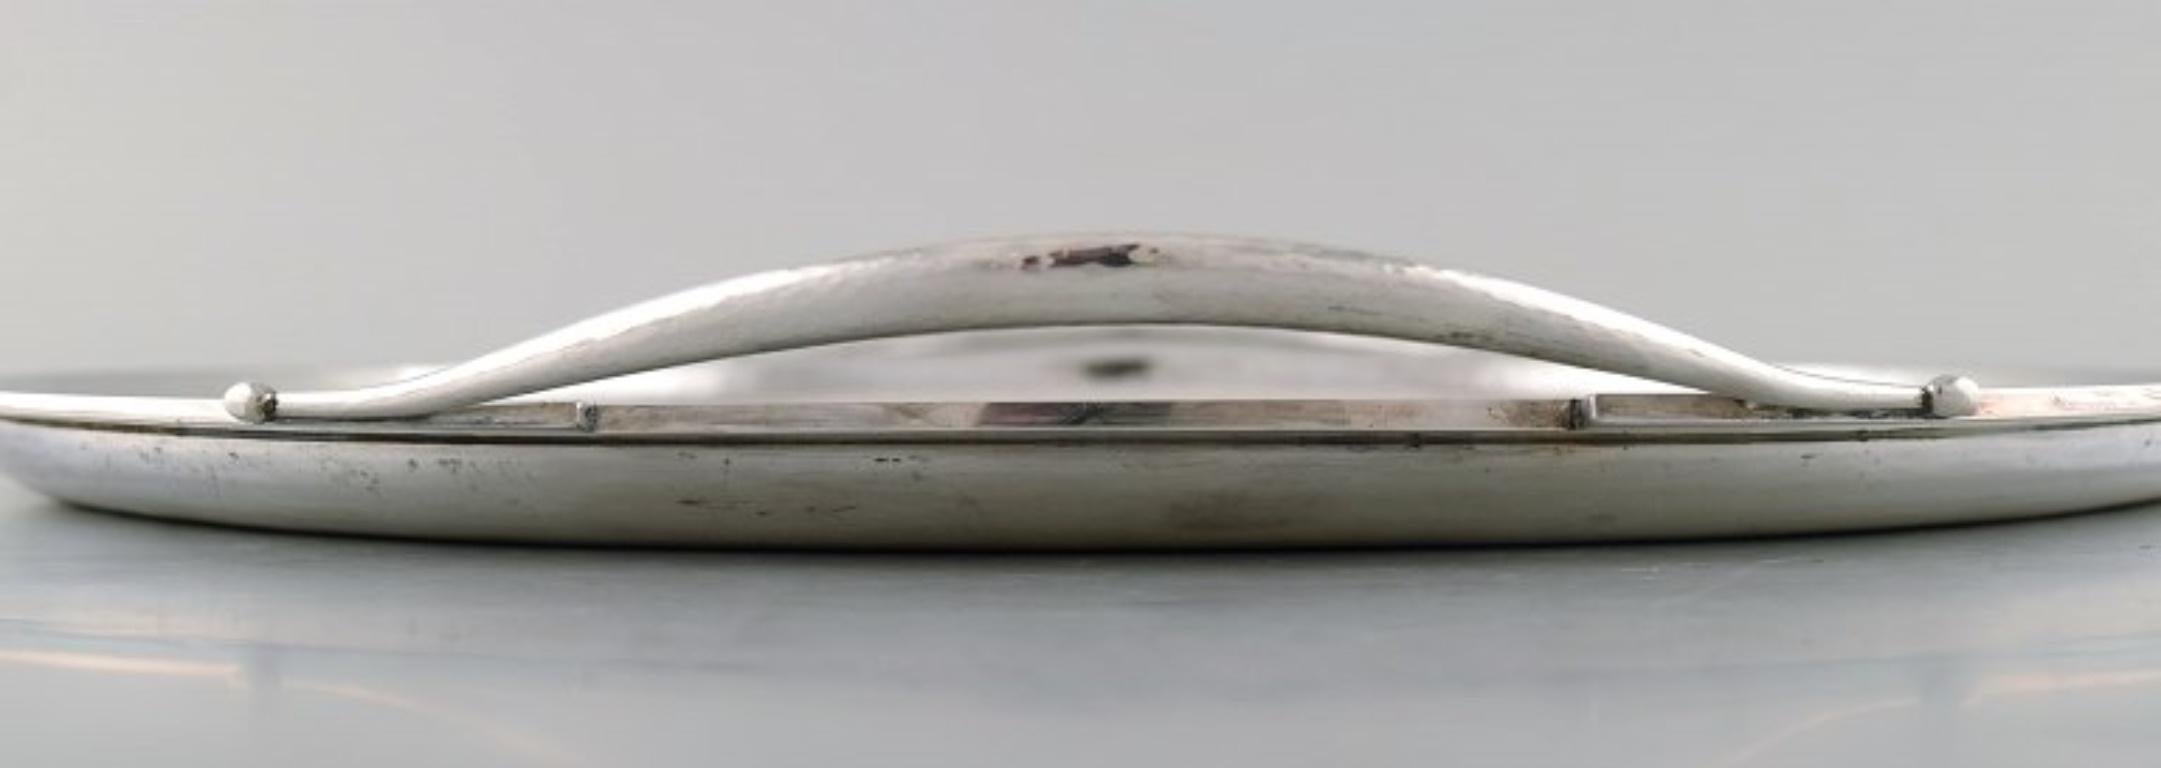 Harald Nielsen for Georg Jensen. Large Art Deco serving tray in sterling silver In Good Condition For Sale In Copenhagen, DK